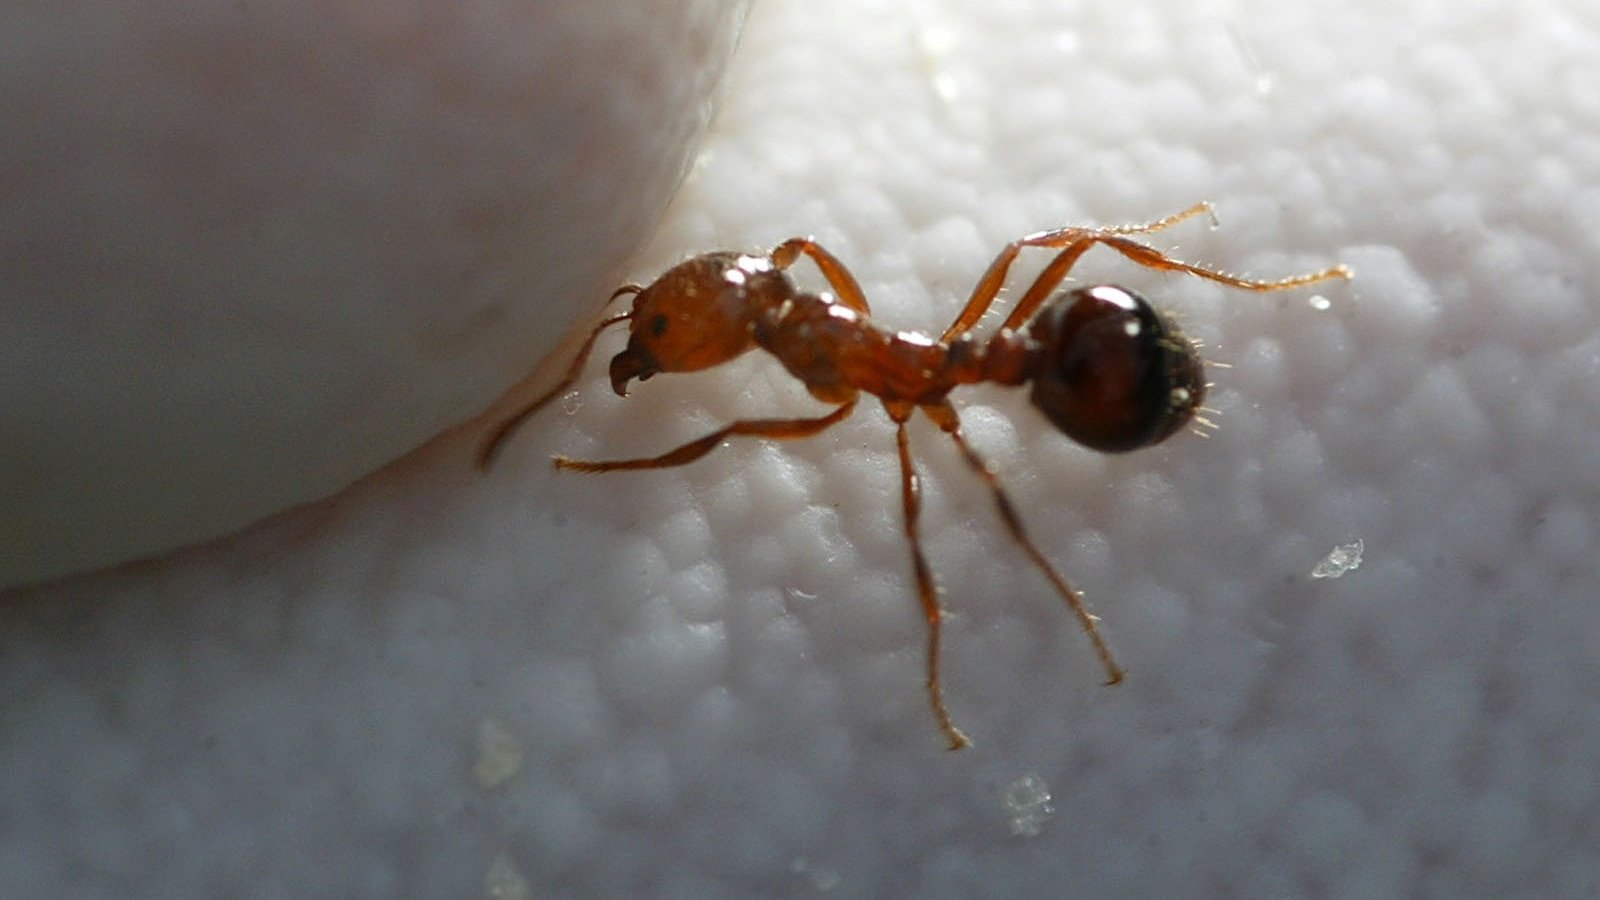 Officials battle 'highly aggressive' red imported fire ant infestation in California